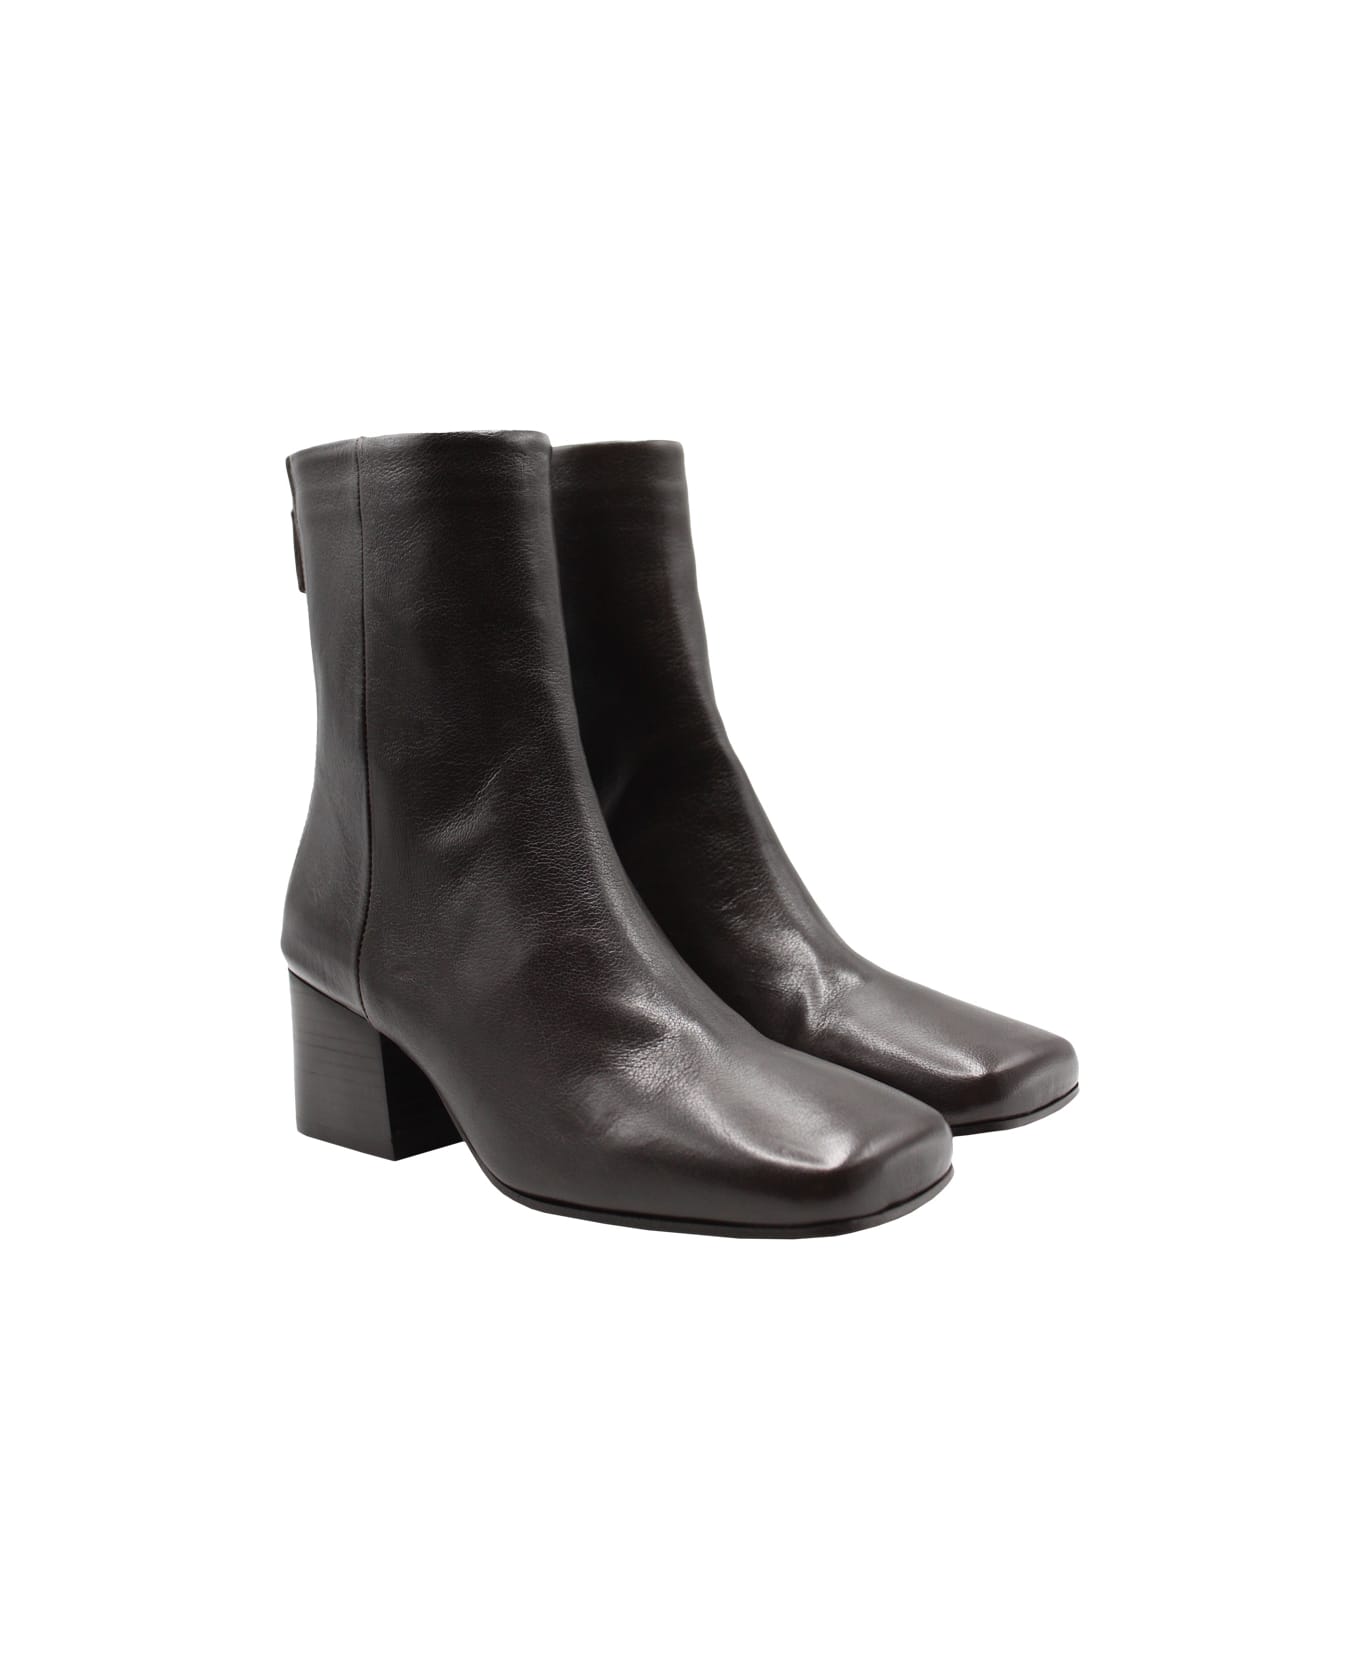 Lemaire Soft Boots 55 - Dark Chocolate ブーツ